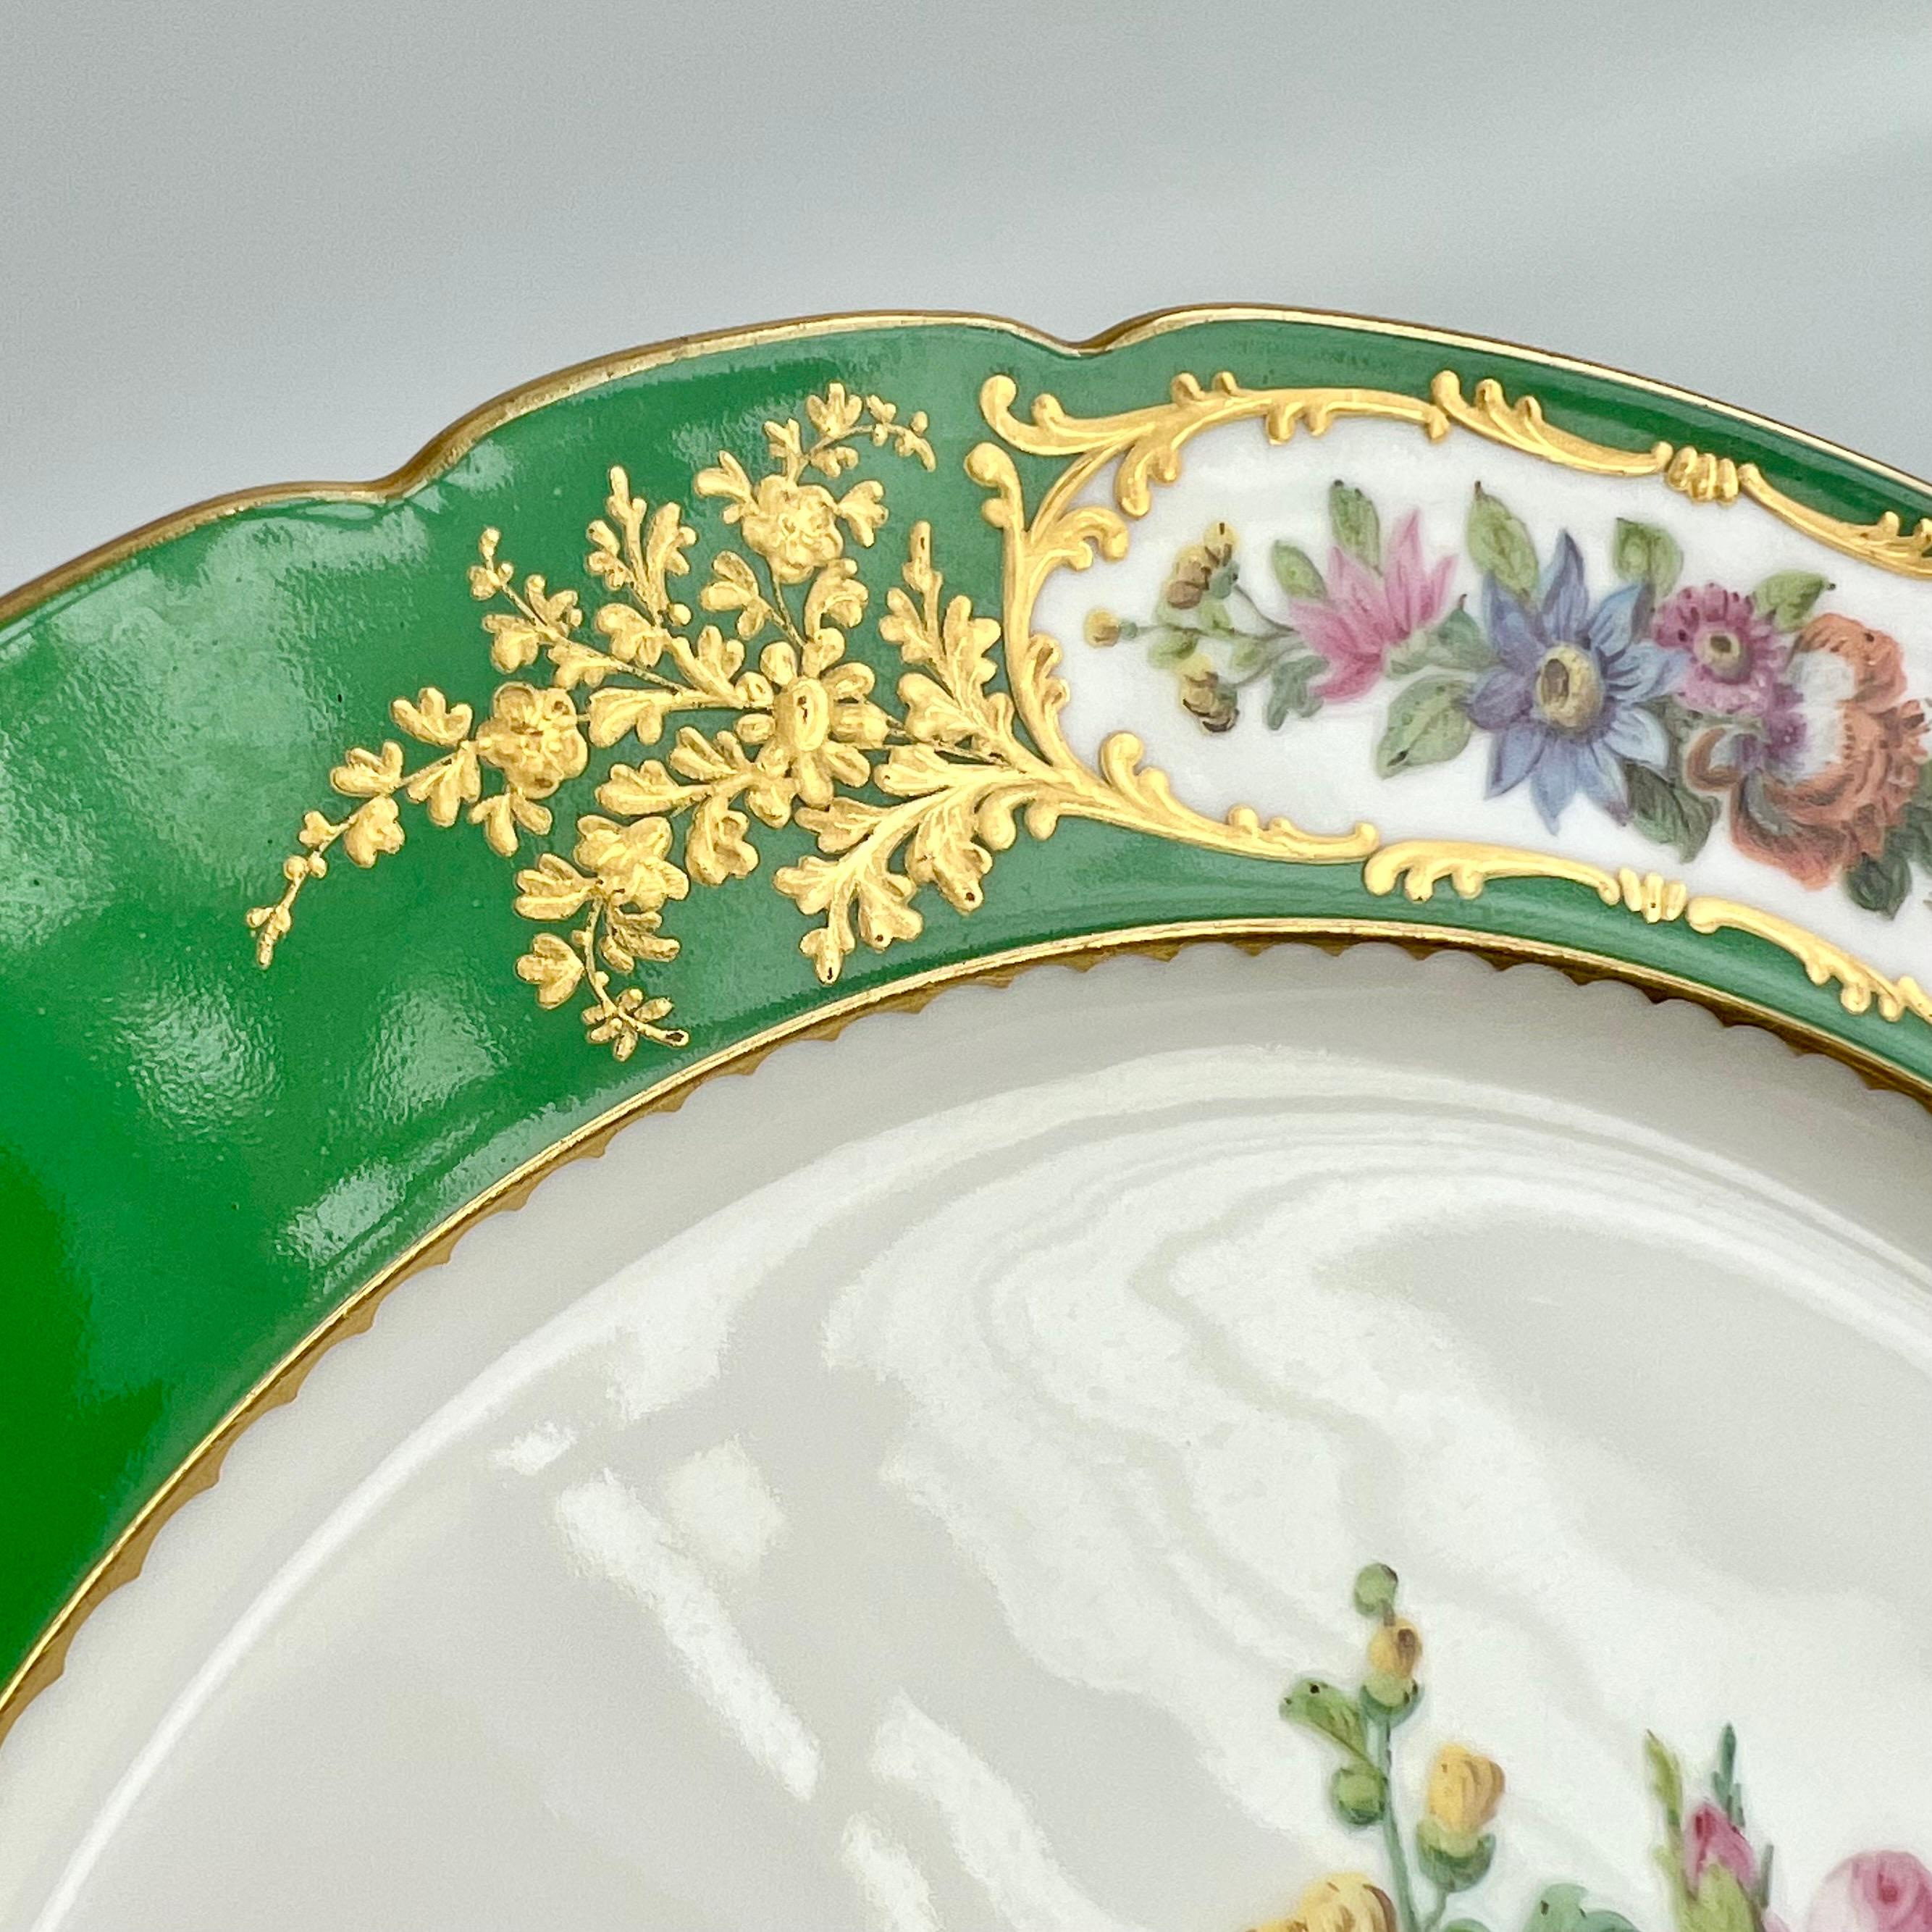 Restauration Vieux Paris Feuillet Set of 6 Plates, French Green, Gilt and Flowers, 1817-1834